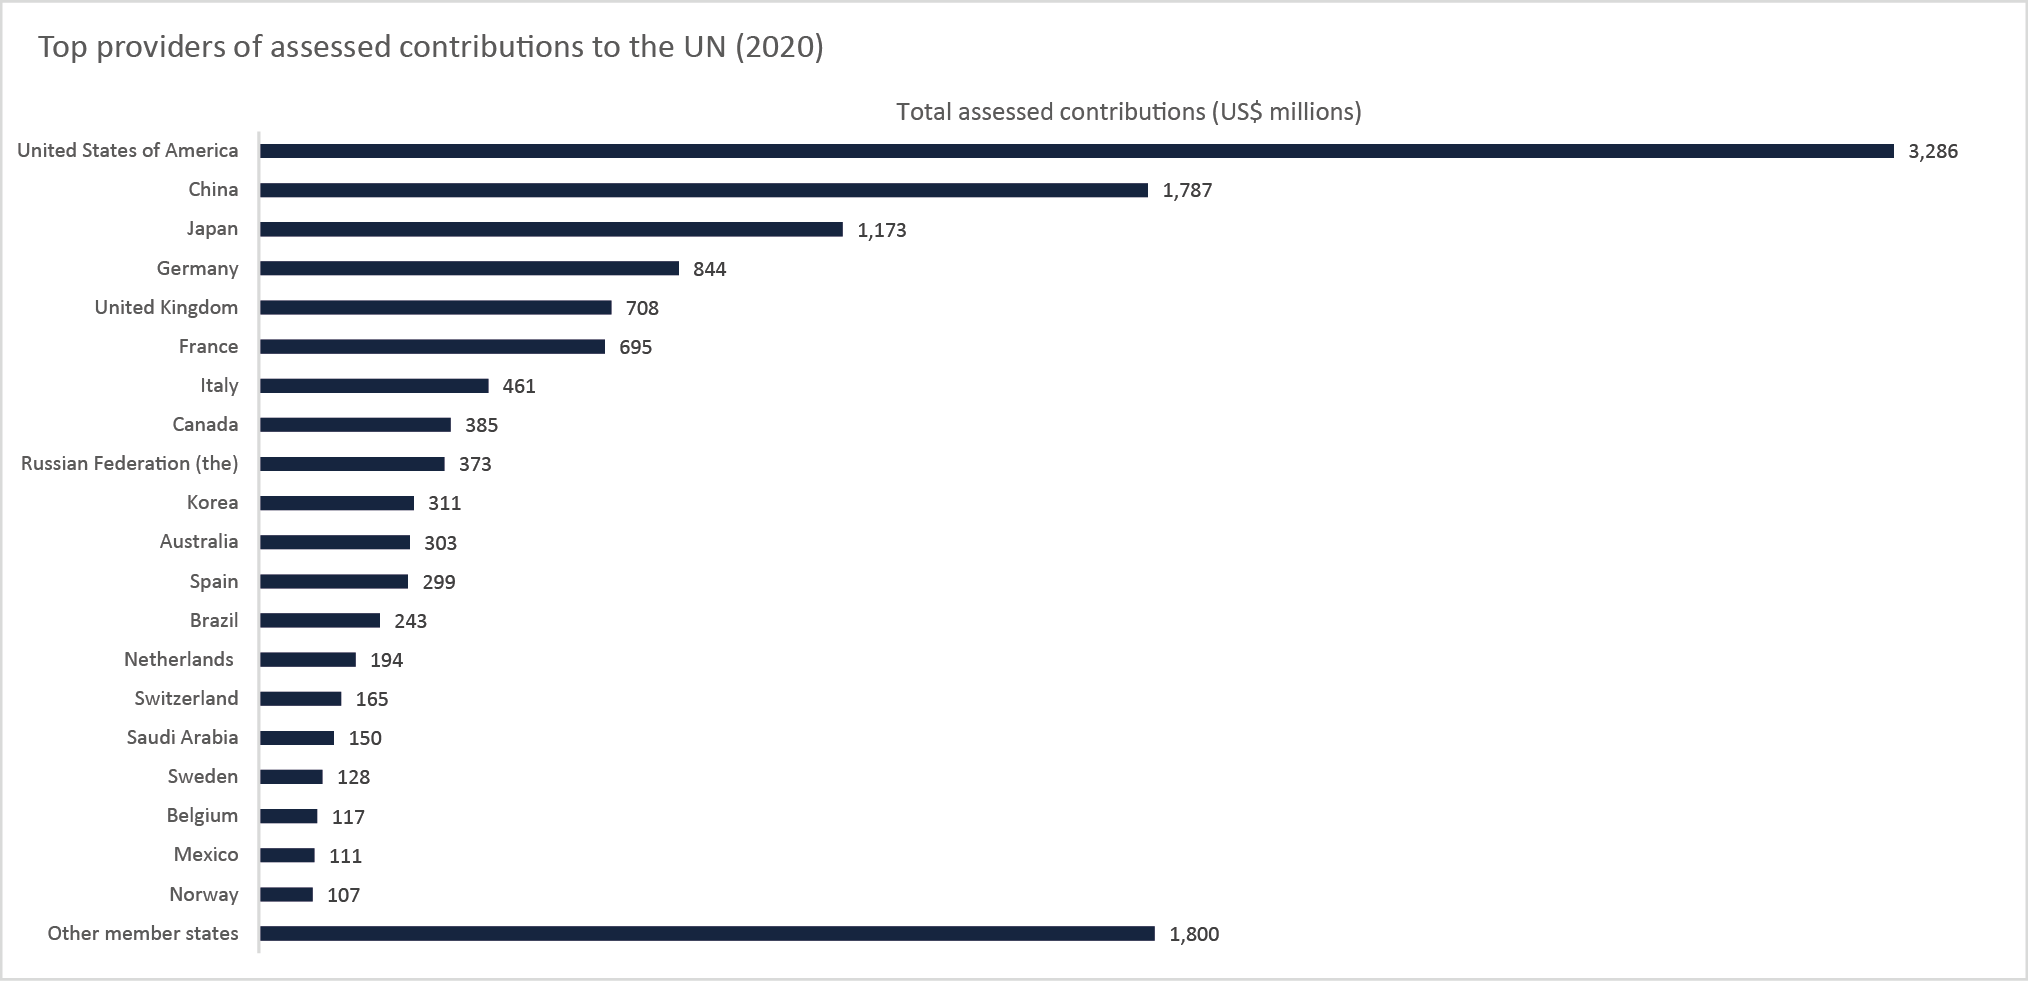 Top providers of assessed contributions to the UN system (2020, US$ mi)